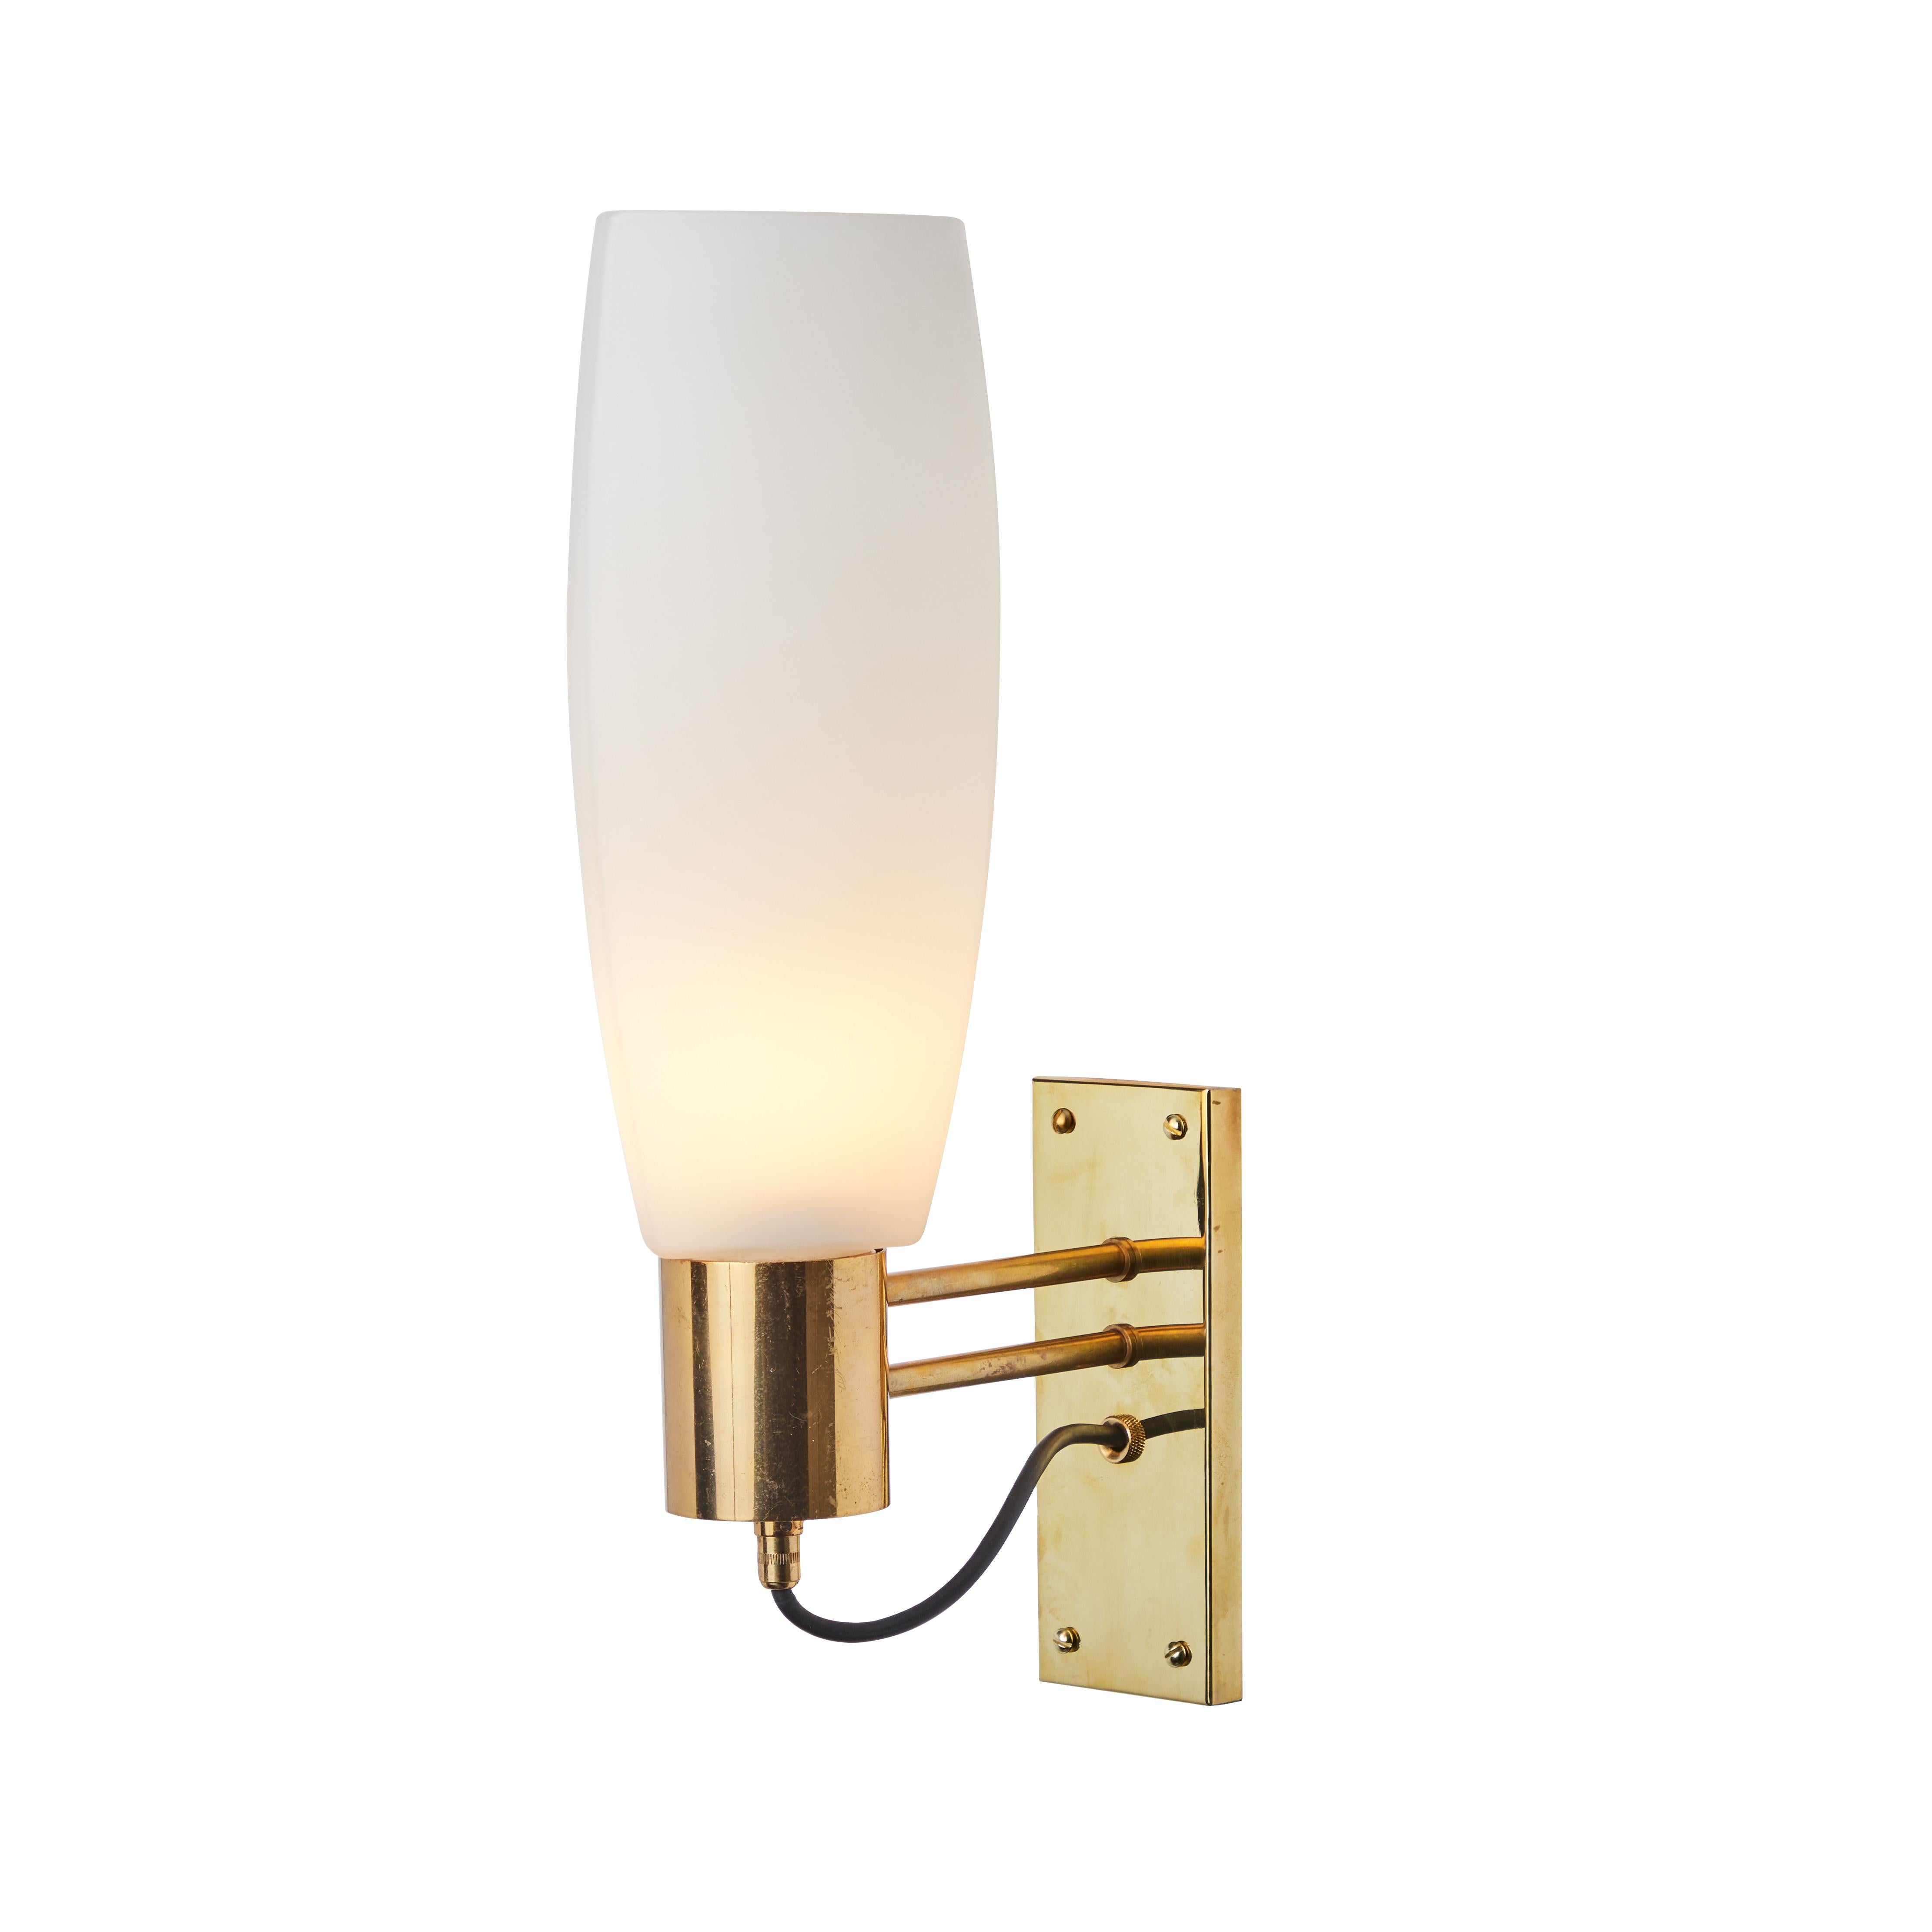 Large pair of 1950s Stilnovo opaline brass and glass sconces. Executed in brass with a sculptural three sided opaline glass. An incomparably clean and refined design characteristic of midcentury Italian lighting at its highest level.

Price is for